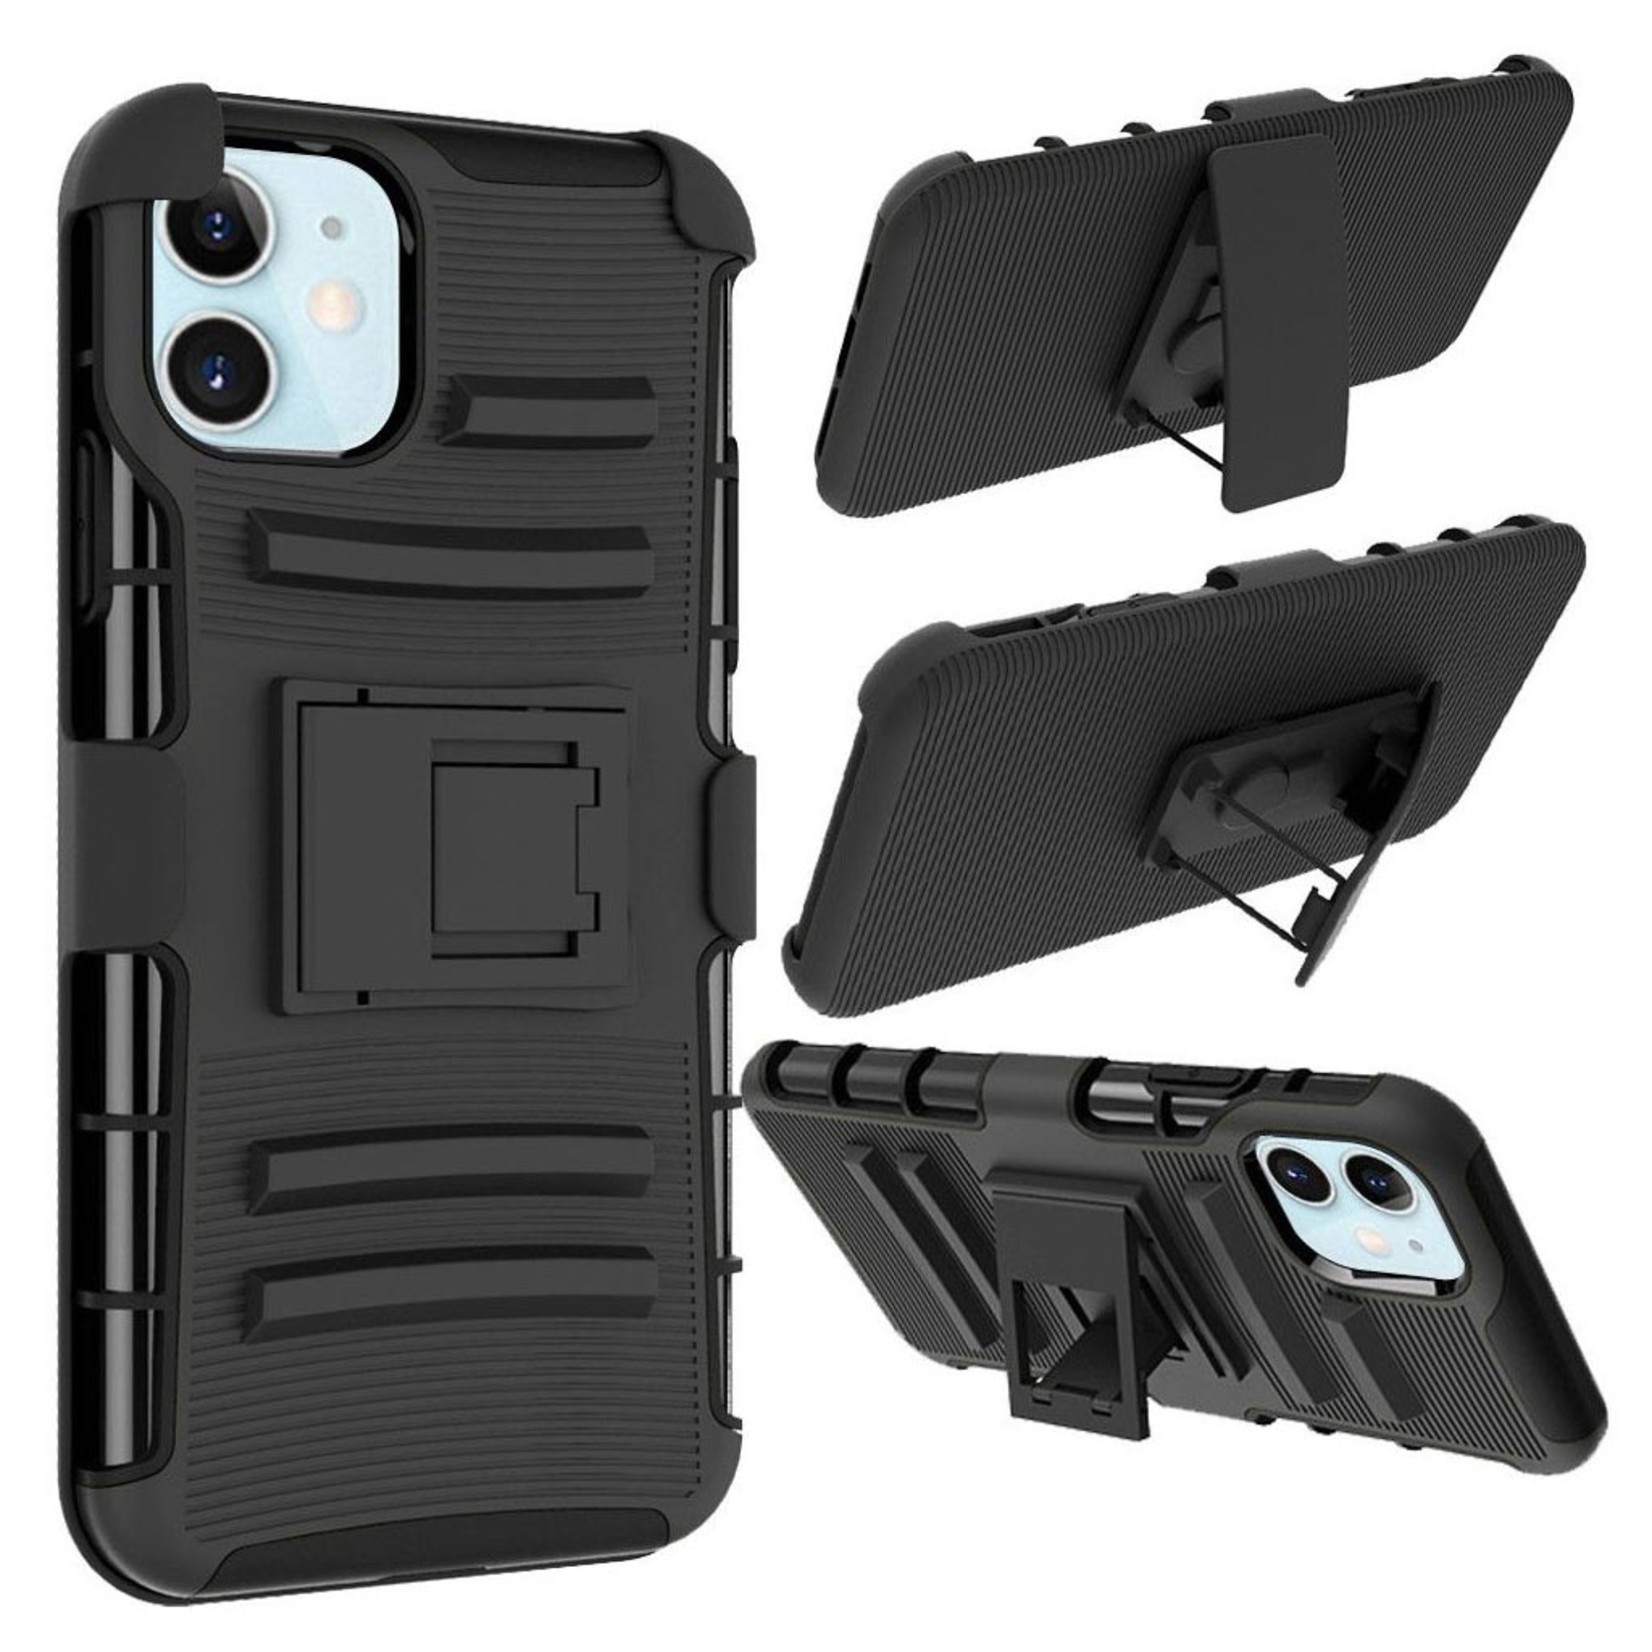 Armor Kickstand Holster Clip Case for iPhone 12 Mini